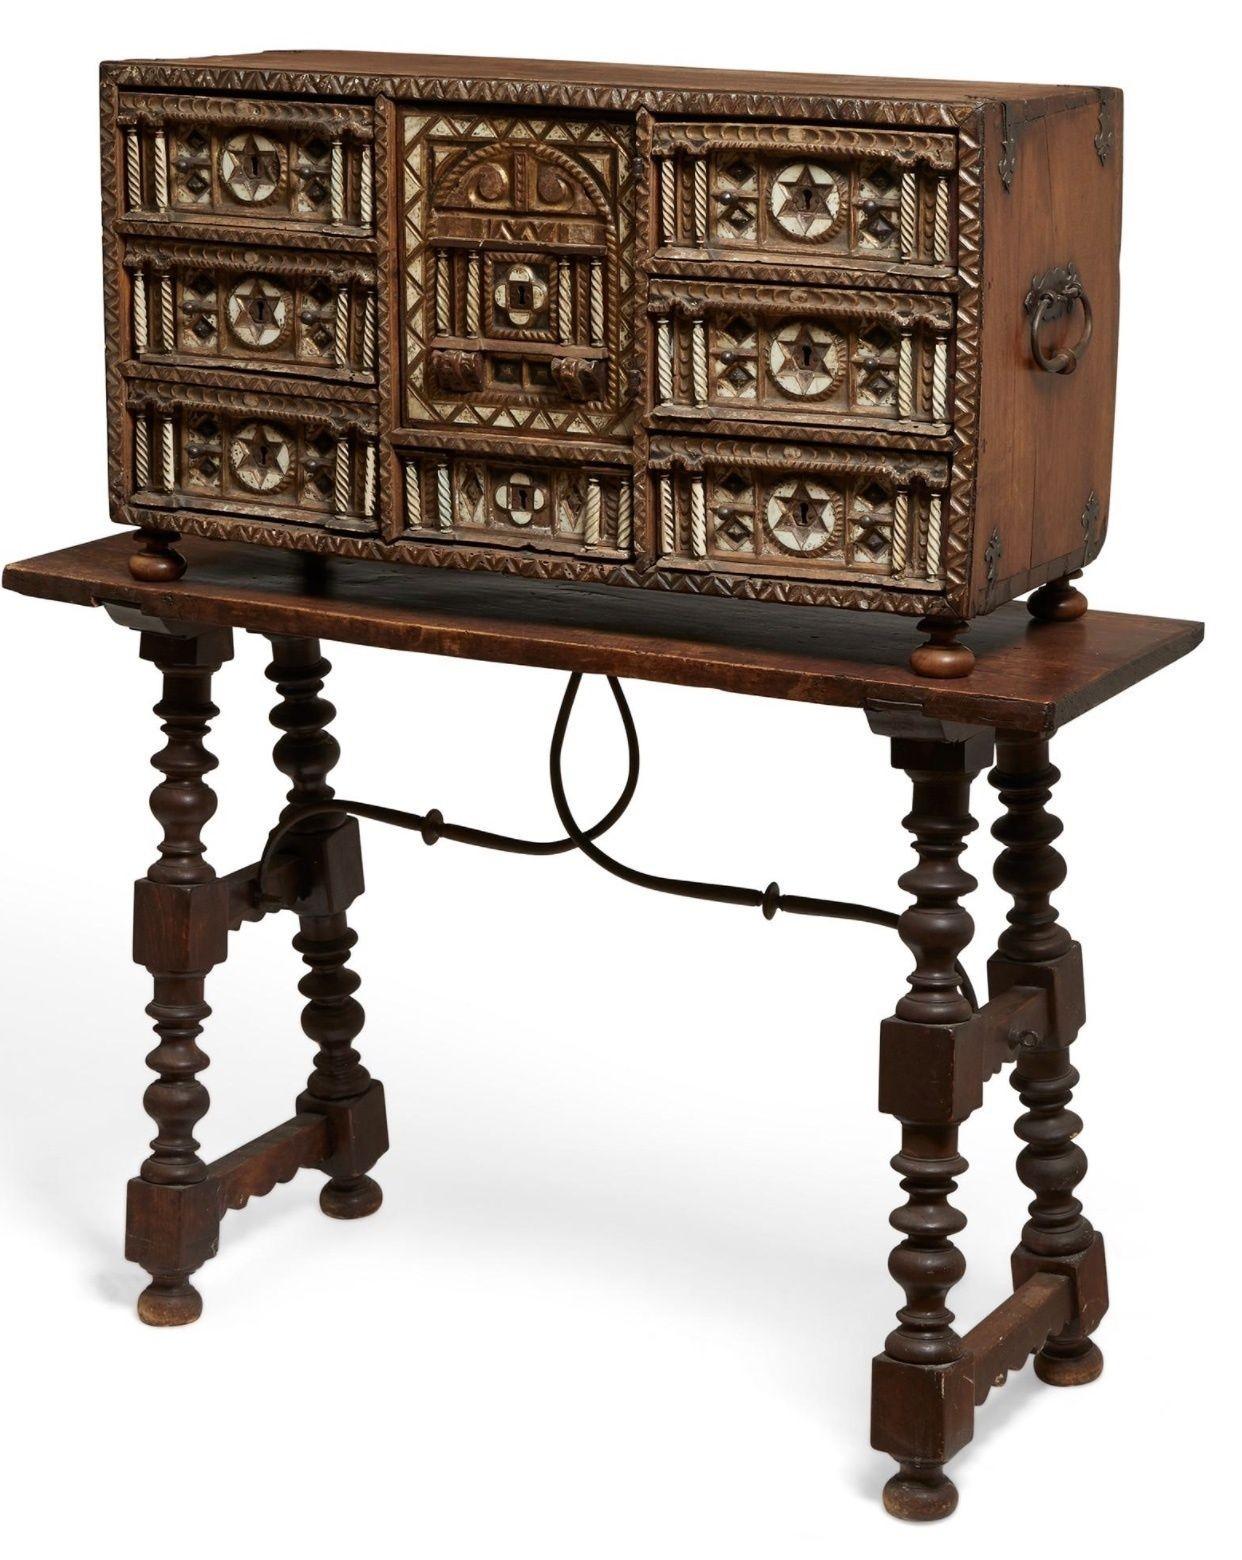 A Spanish baroque table cabinet with inlaid bone and gilt from the 17th century. Dimensions: 50